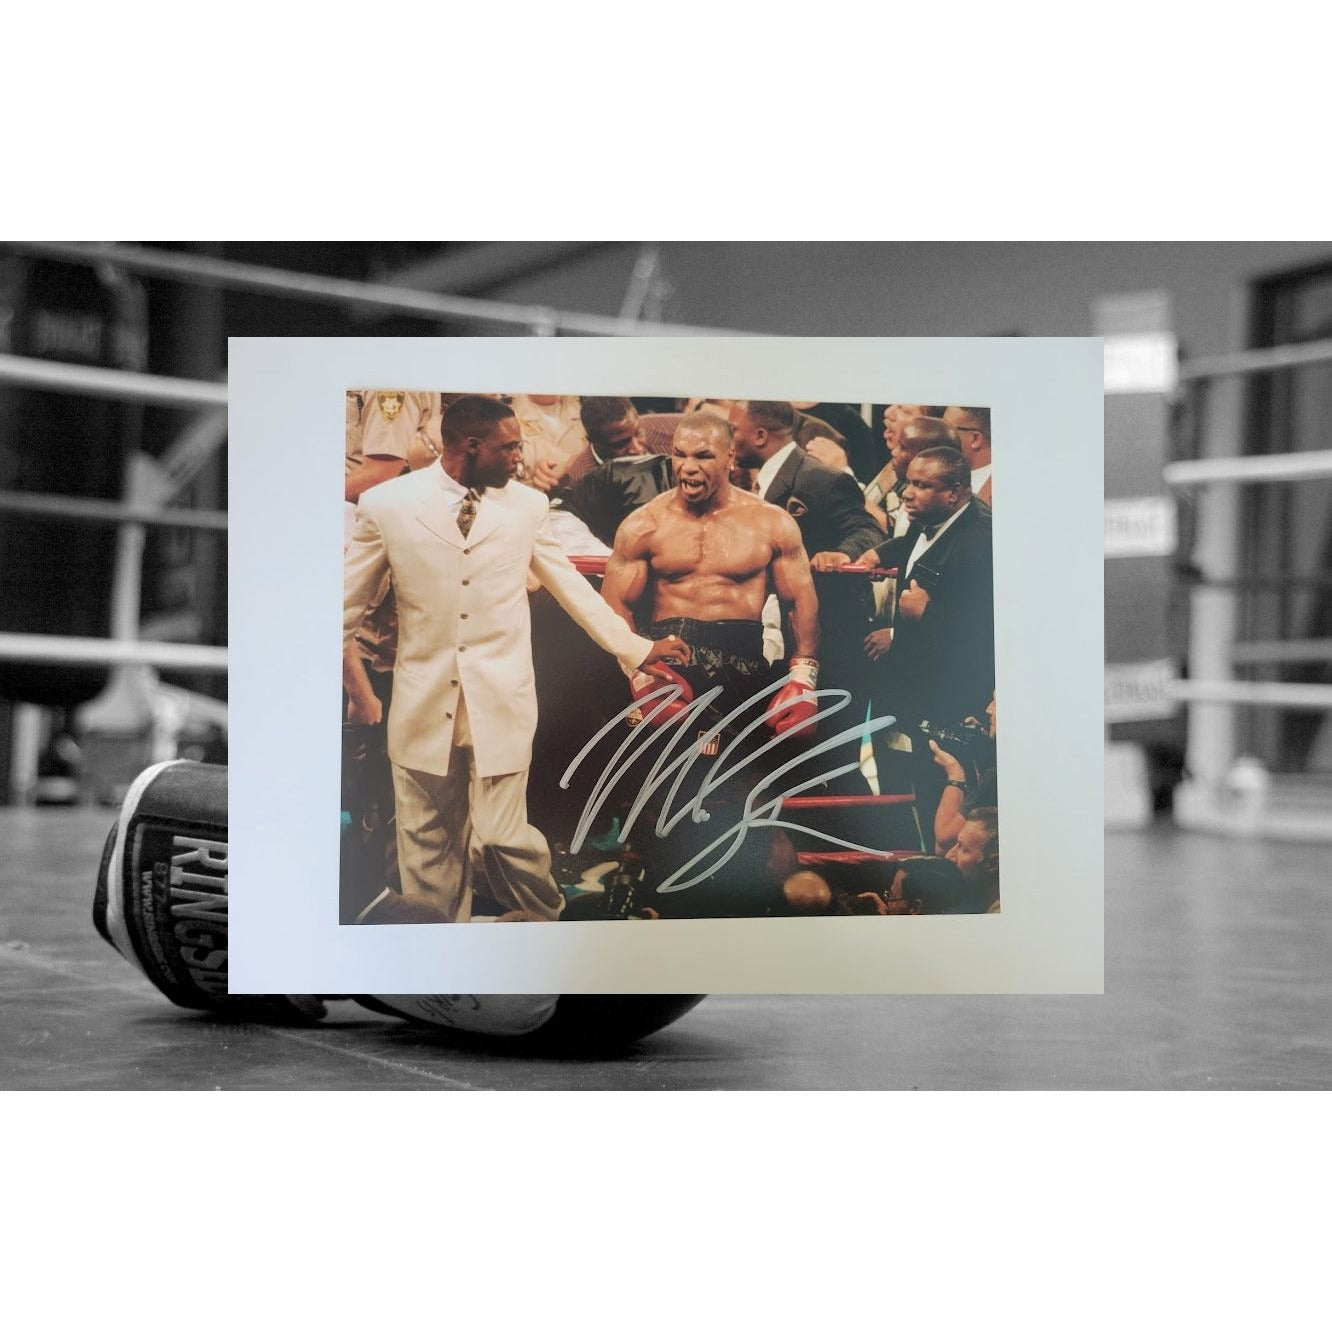 Mike Tyson 8 x 10 photo sign with proof